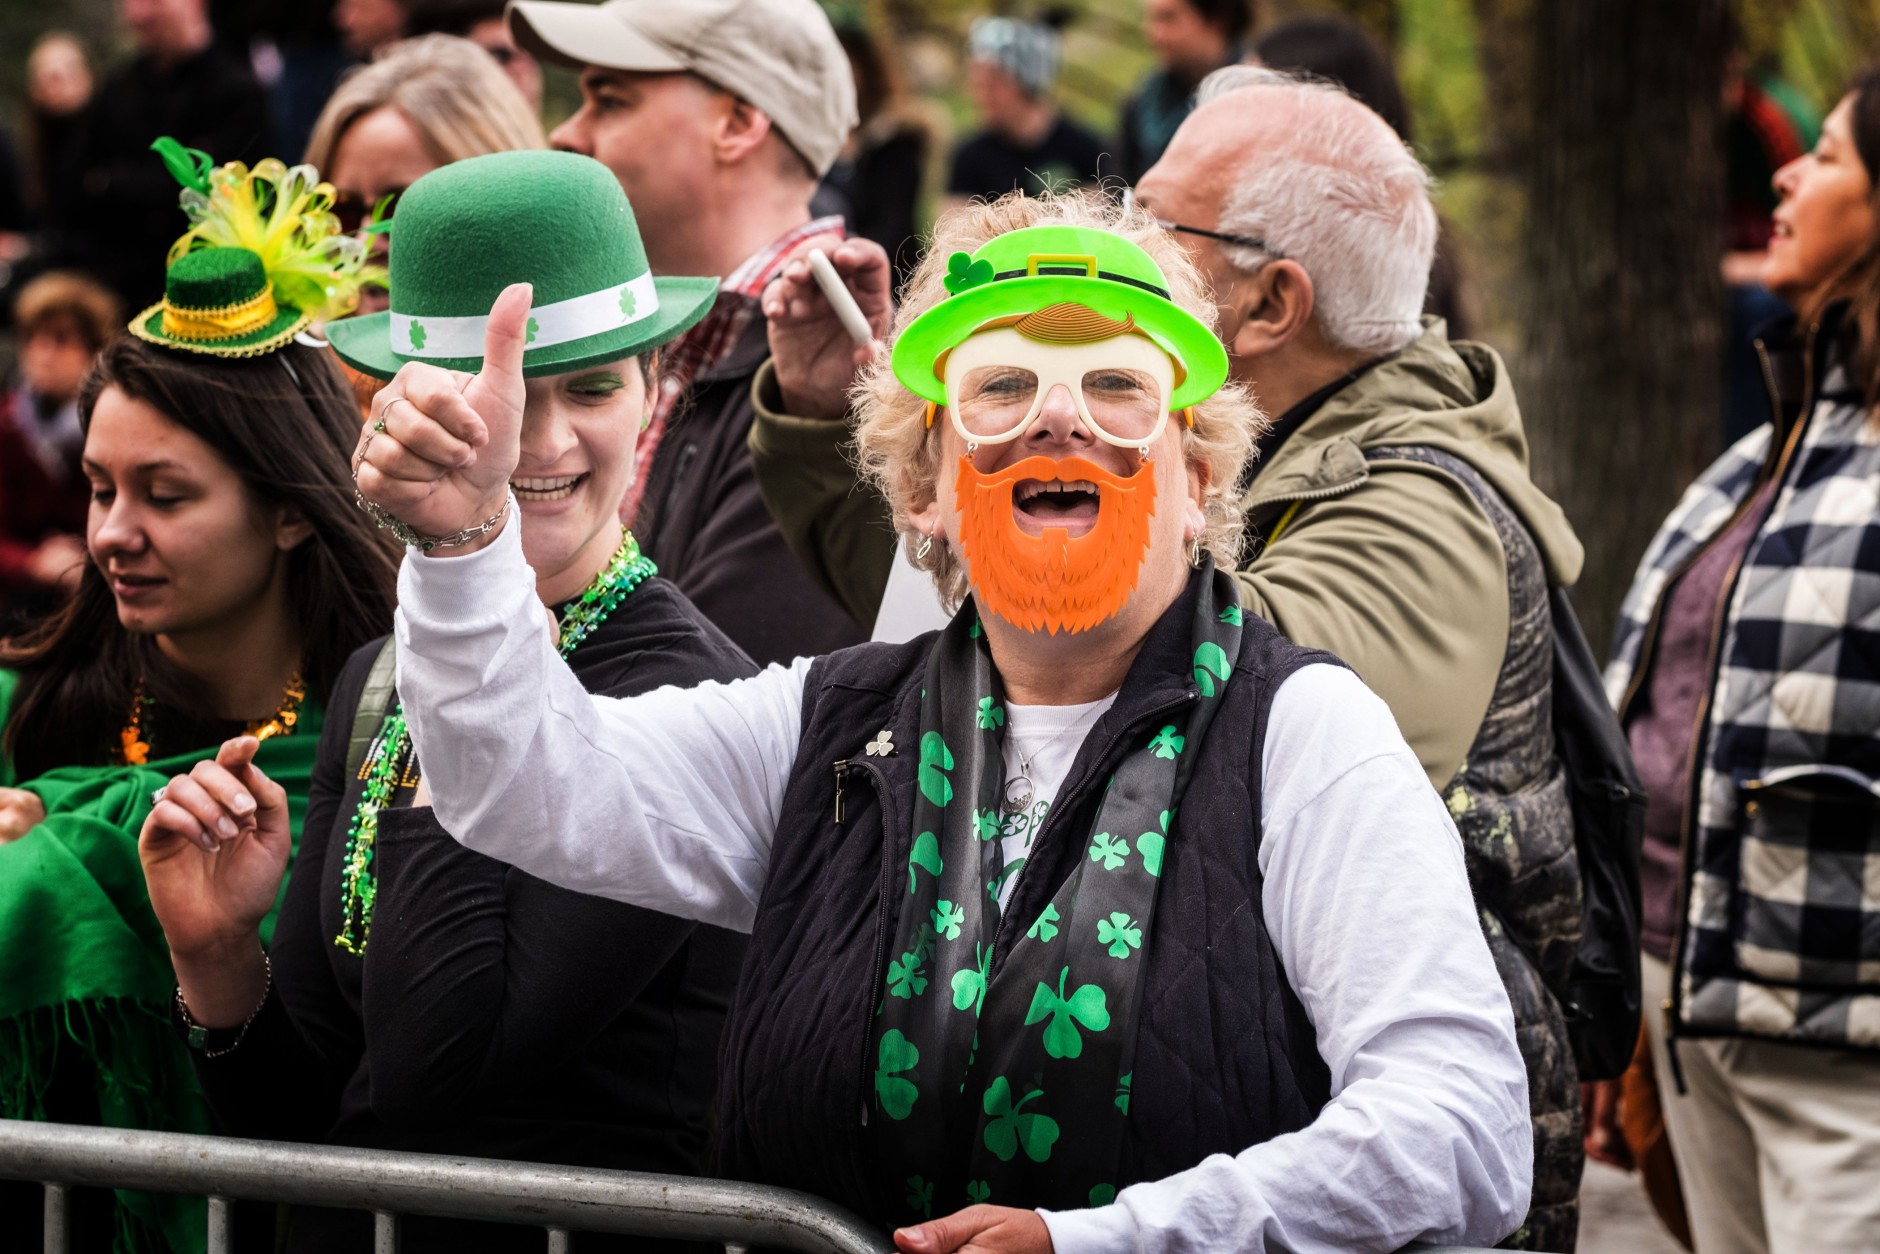 NEW YORK, NY - MARCH 17:  Attendees seen at the 255th annual St. Patrick's Day Parade along Fifth Avenue in New York City on March 17, 2016 in New York City.  (Photo by Larry Busacca/Getty Images)